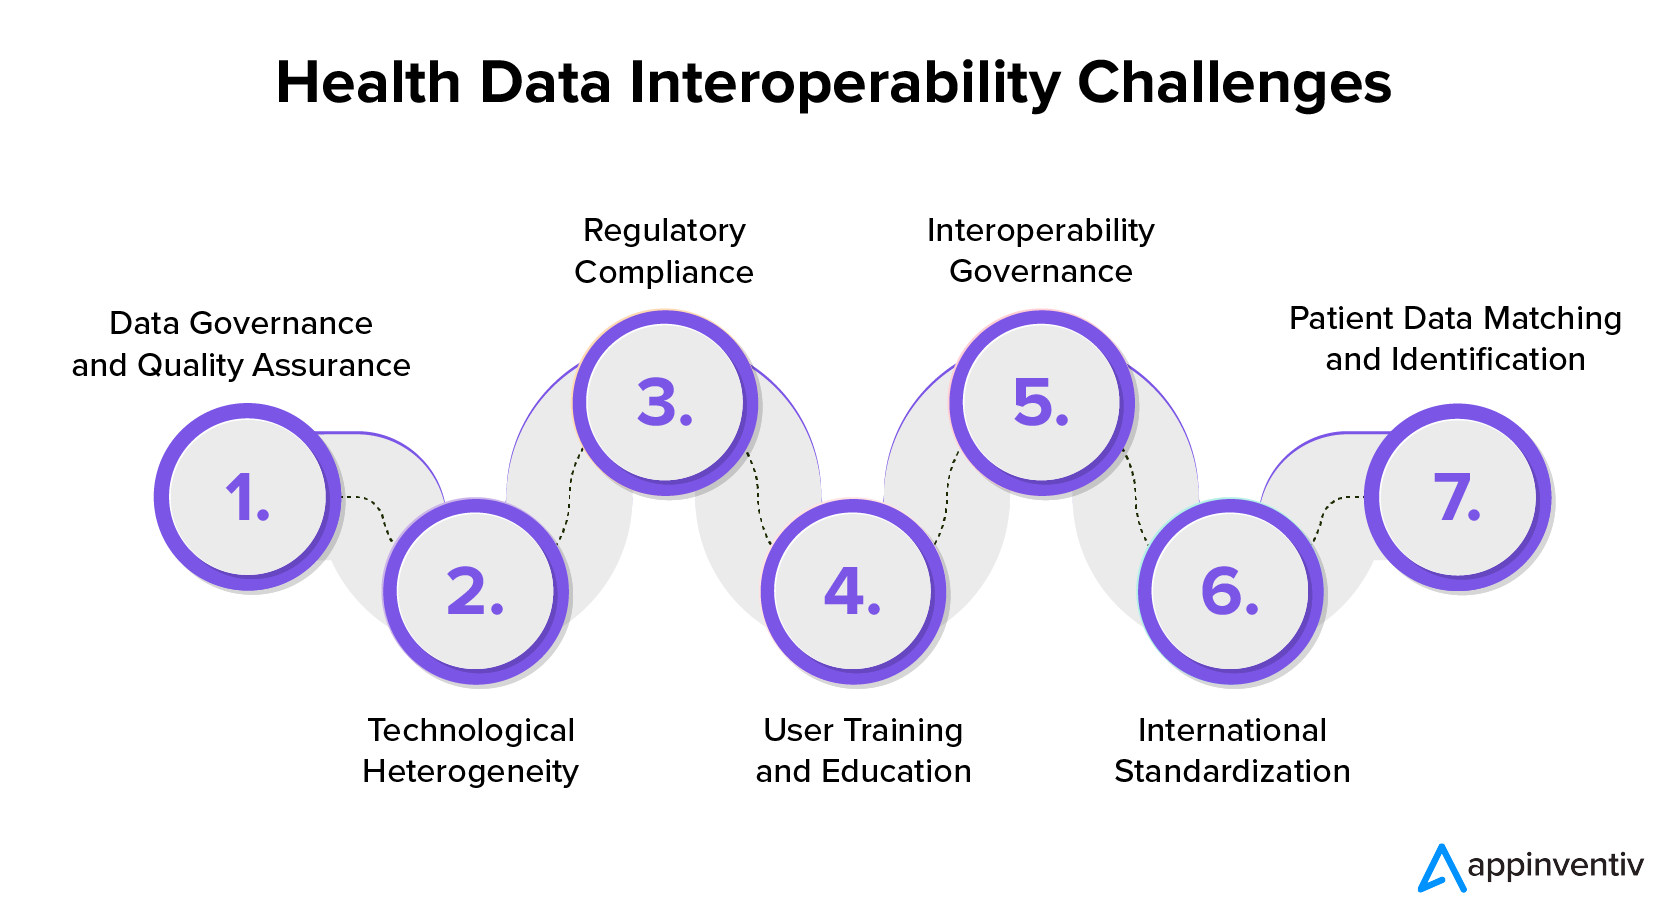 Why is data interoperability crucial for modern healthcare systems?